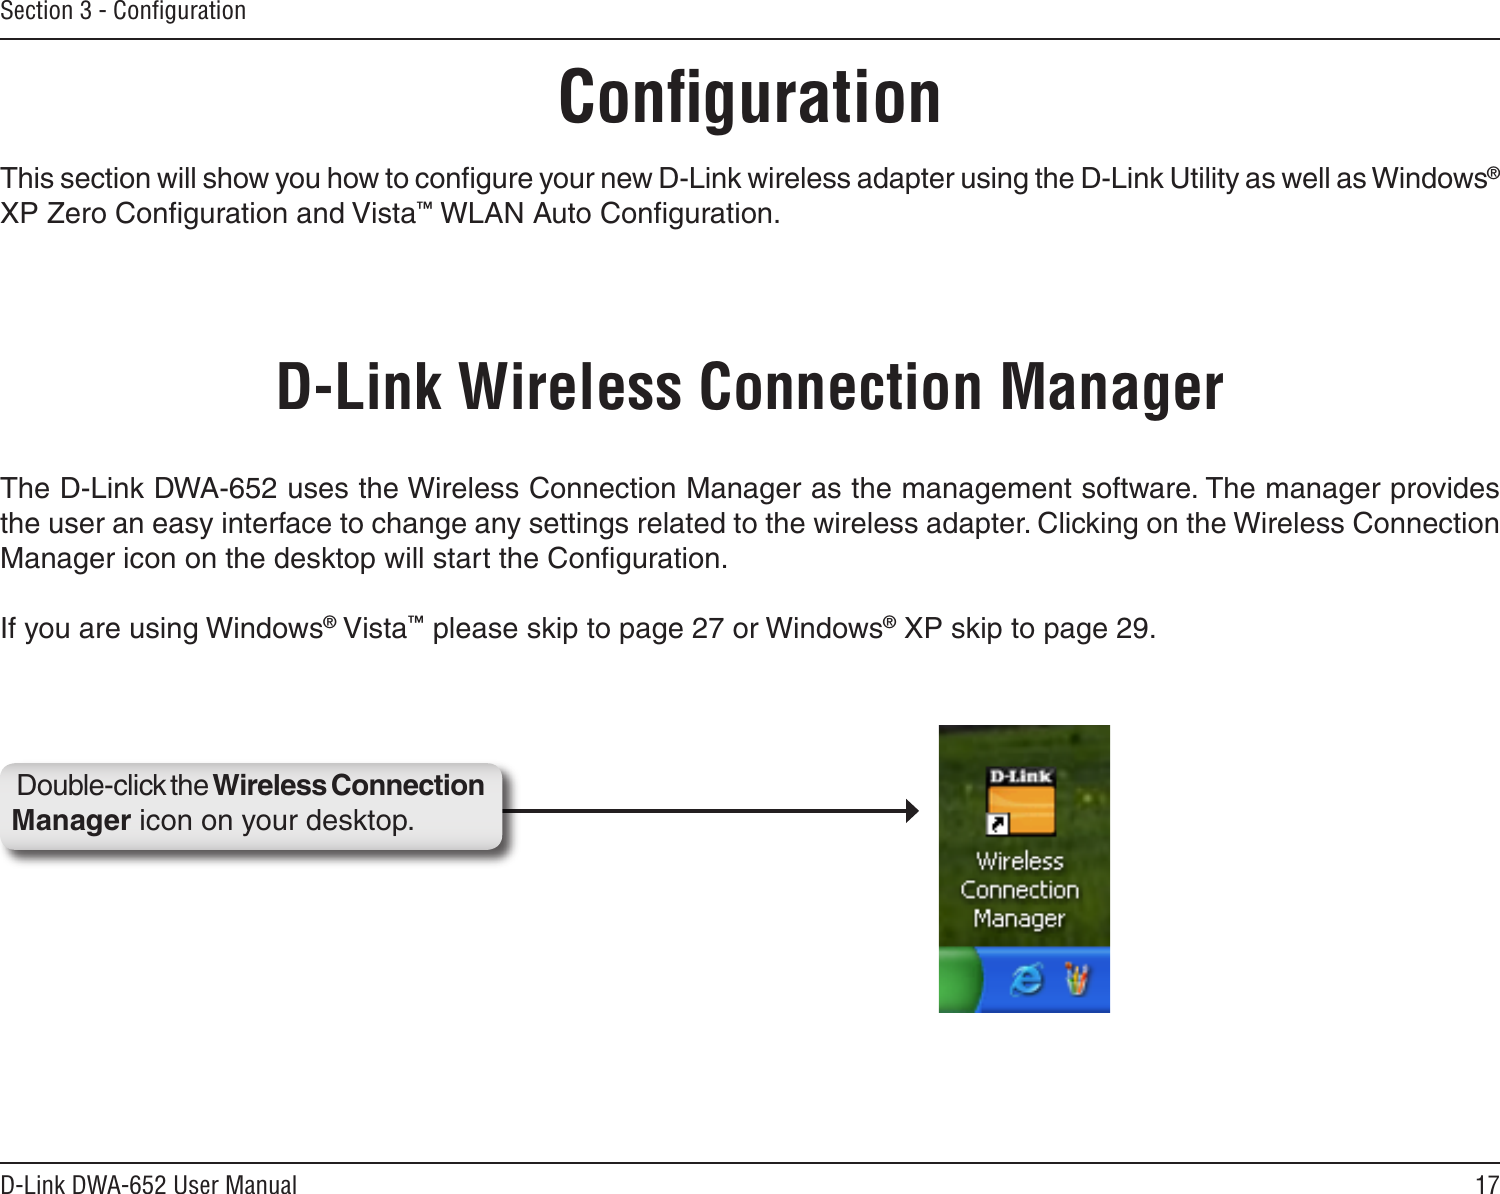 17D-Link DWA-652 User ManualSection 3 - ConﬁgurationConﬁgurationThis section will show you how to conﬁgure your new D-Link wireless adapter using the D-Link Utility as well as Windows® XP Zero Conﬁguration and Vista™ WLAN Auto Conﬁguration.D-Link Wireless Connection ManagerThe D-Link DWA-652 uses the Wireless Connection Manager as the management software. The manager provides the user an easy interface to change any settings related to the wireless adapter. Clicking on the Wireless Connection Manager icon on the desktop will start the Conﬁguration.If you are using Windows® Vista™ please skip to page 27 or Windows® XP skip to page 29.Double-click the Wireless Connection Manager icon on your desktop.